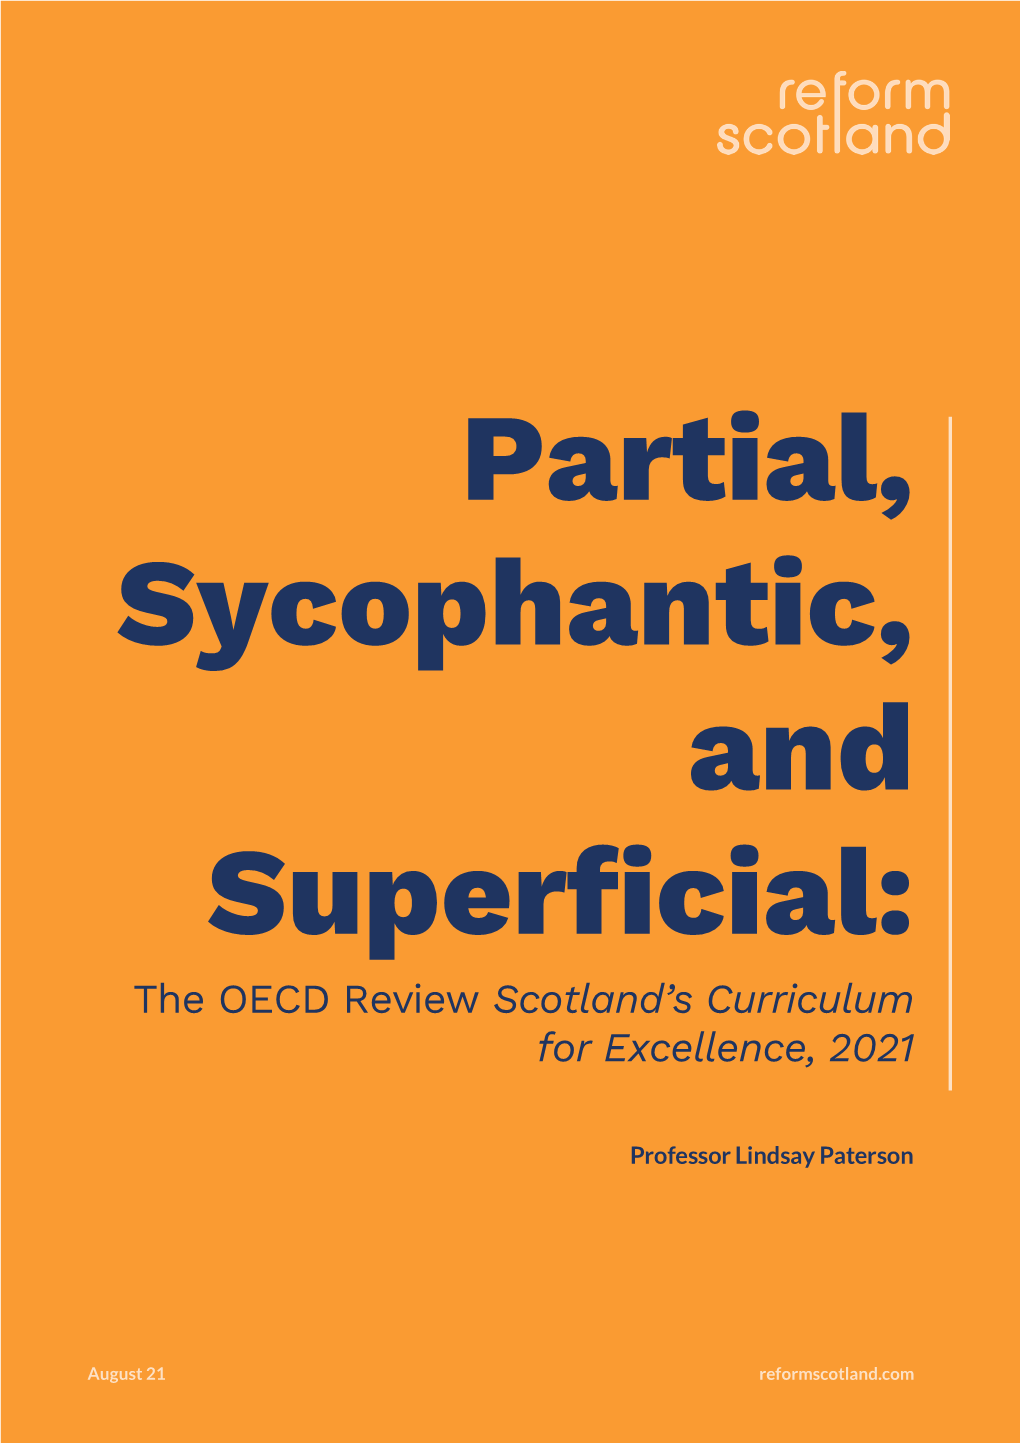 The OECD Review Scotland's Curriculum for Excellence, 2021